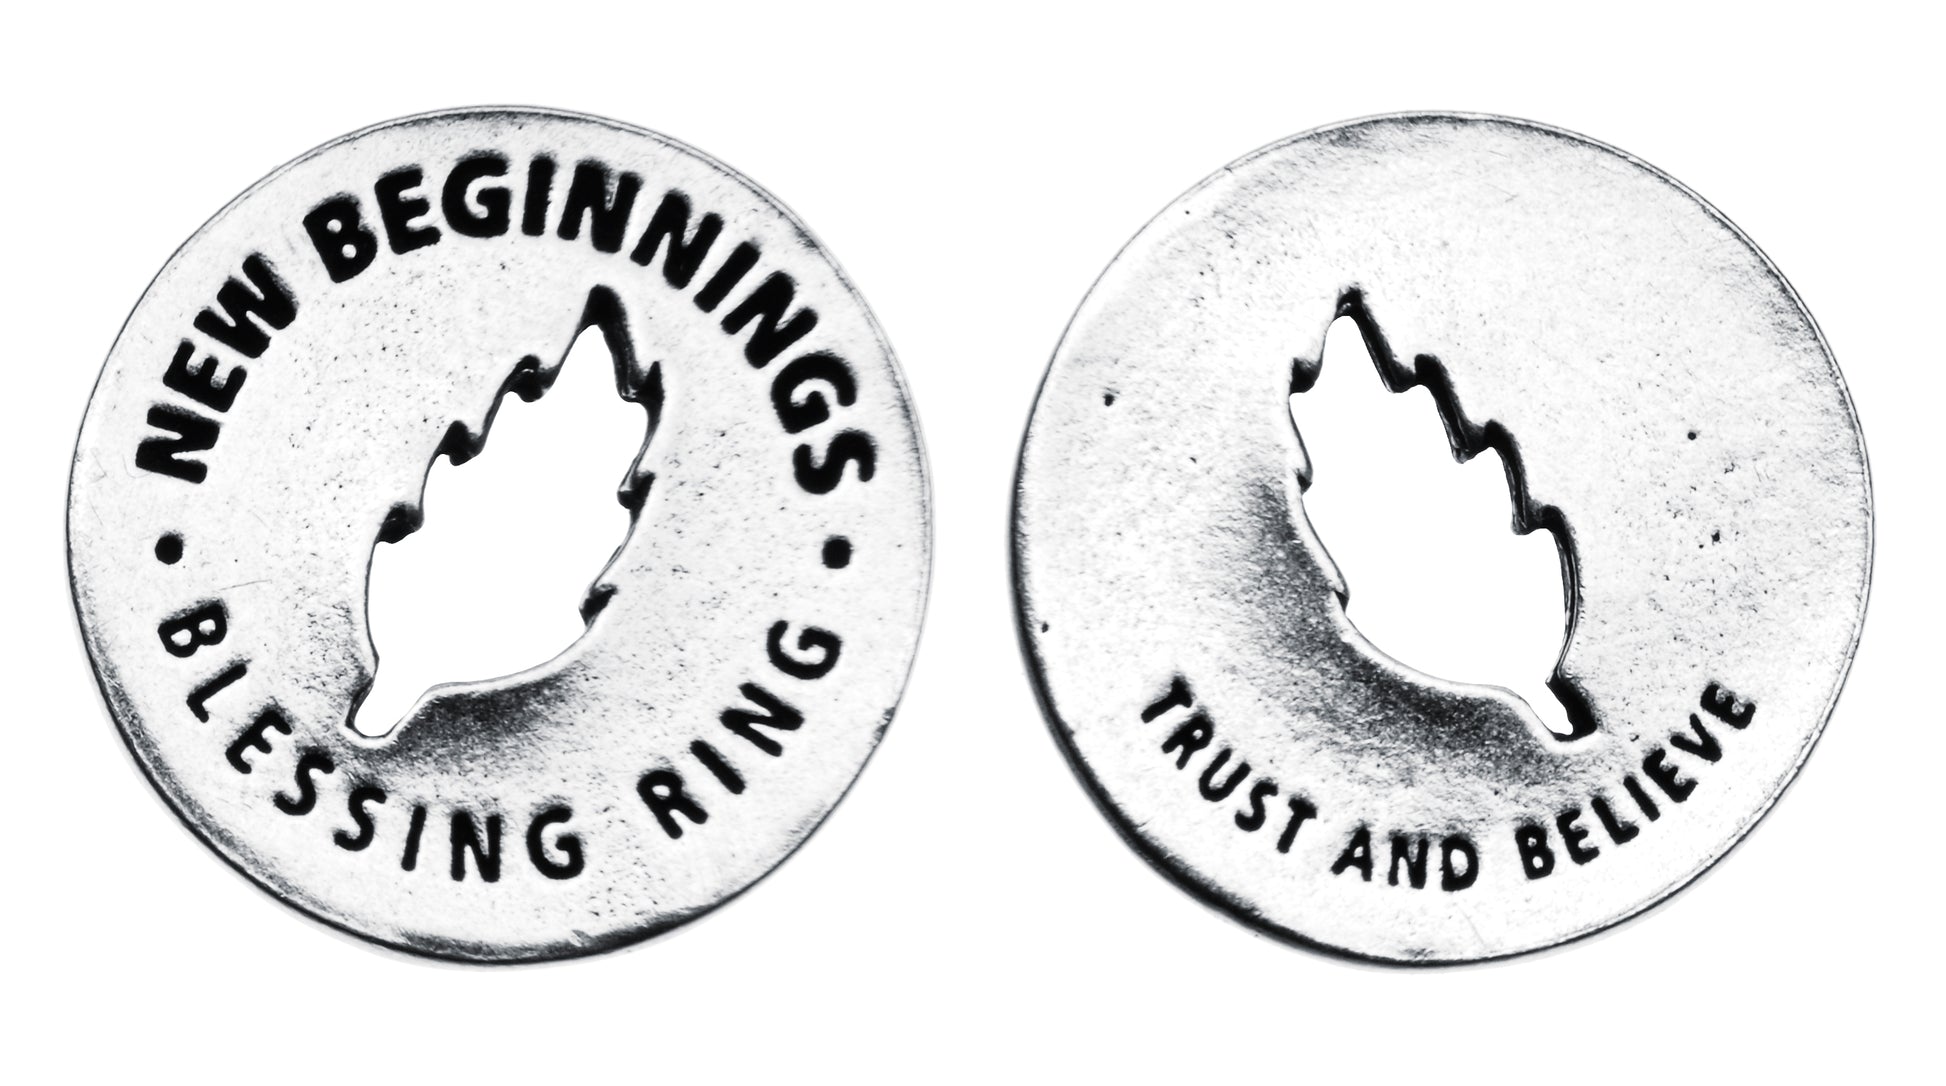 New Beginnings Blessing Ring front and back